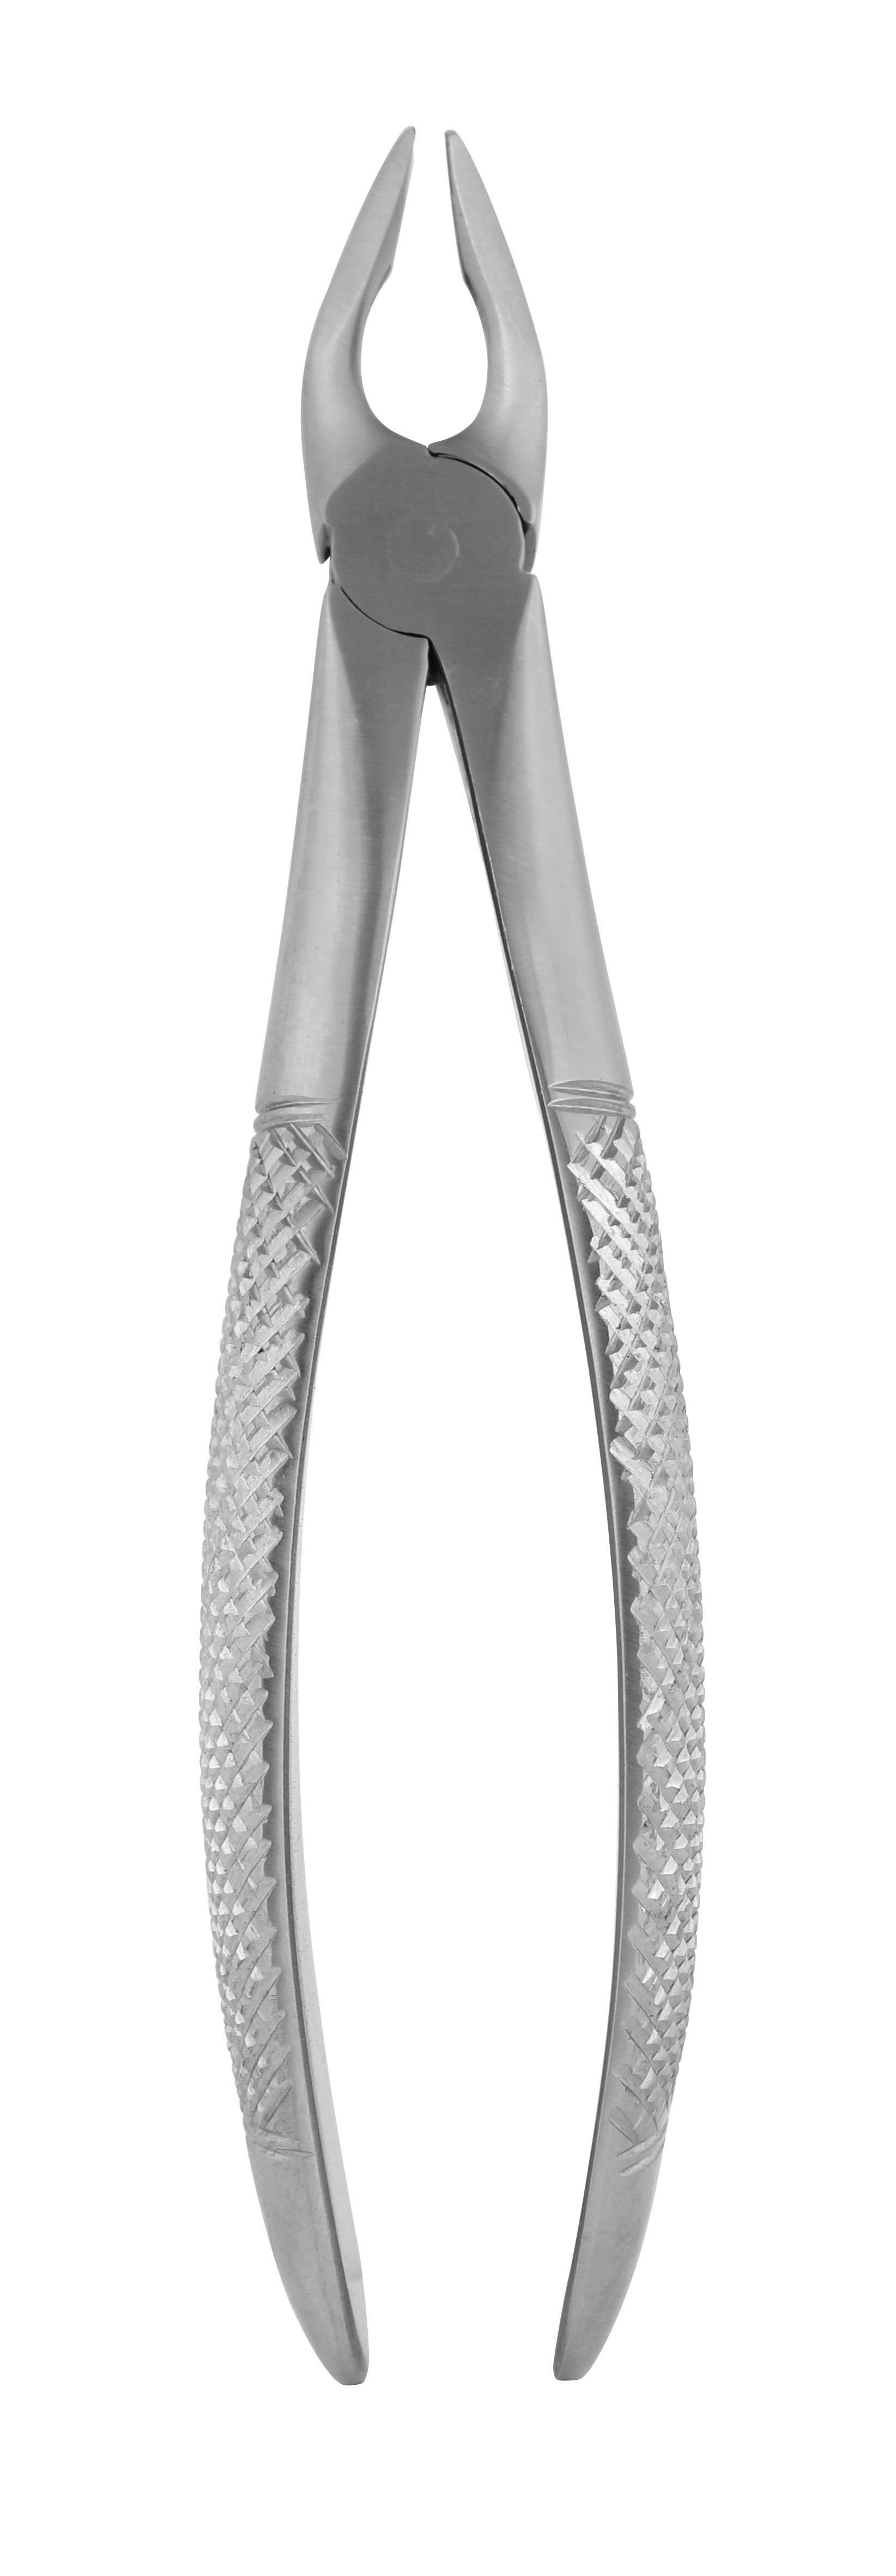 Extraction Forceps 035